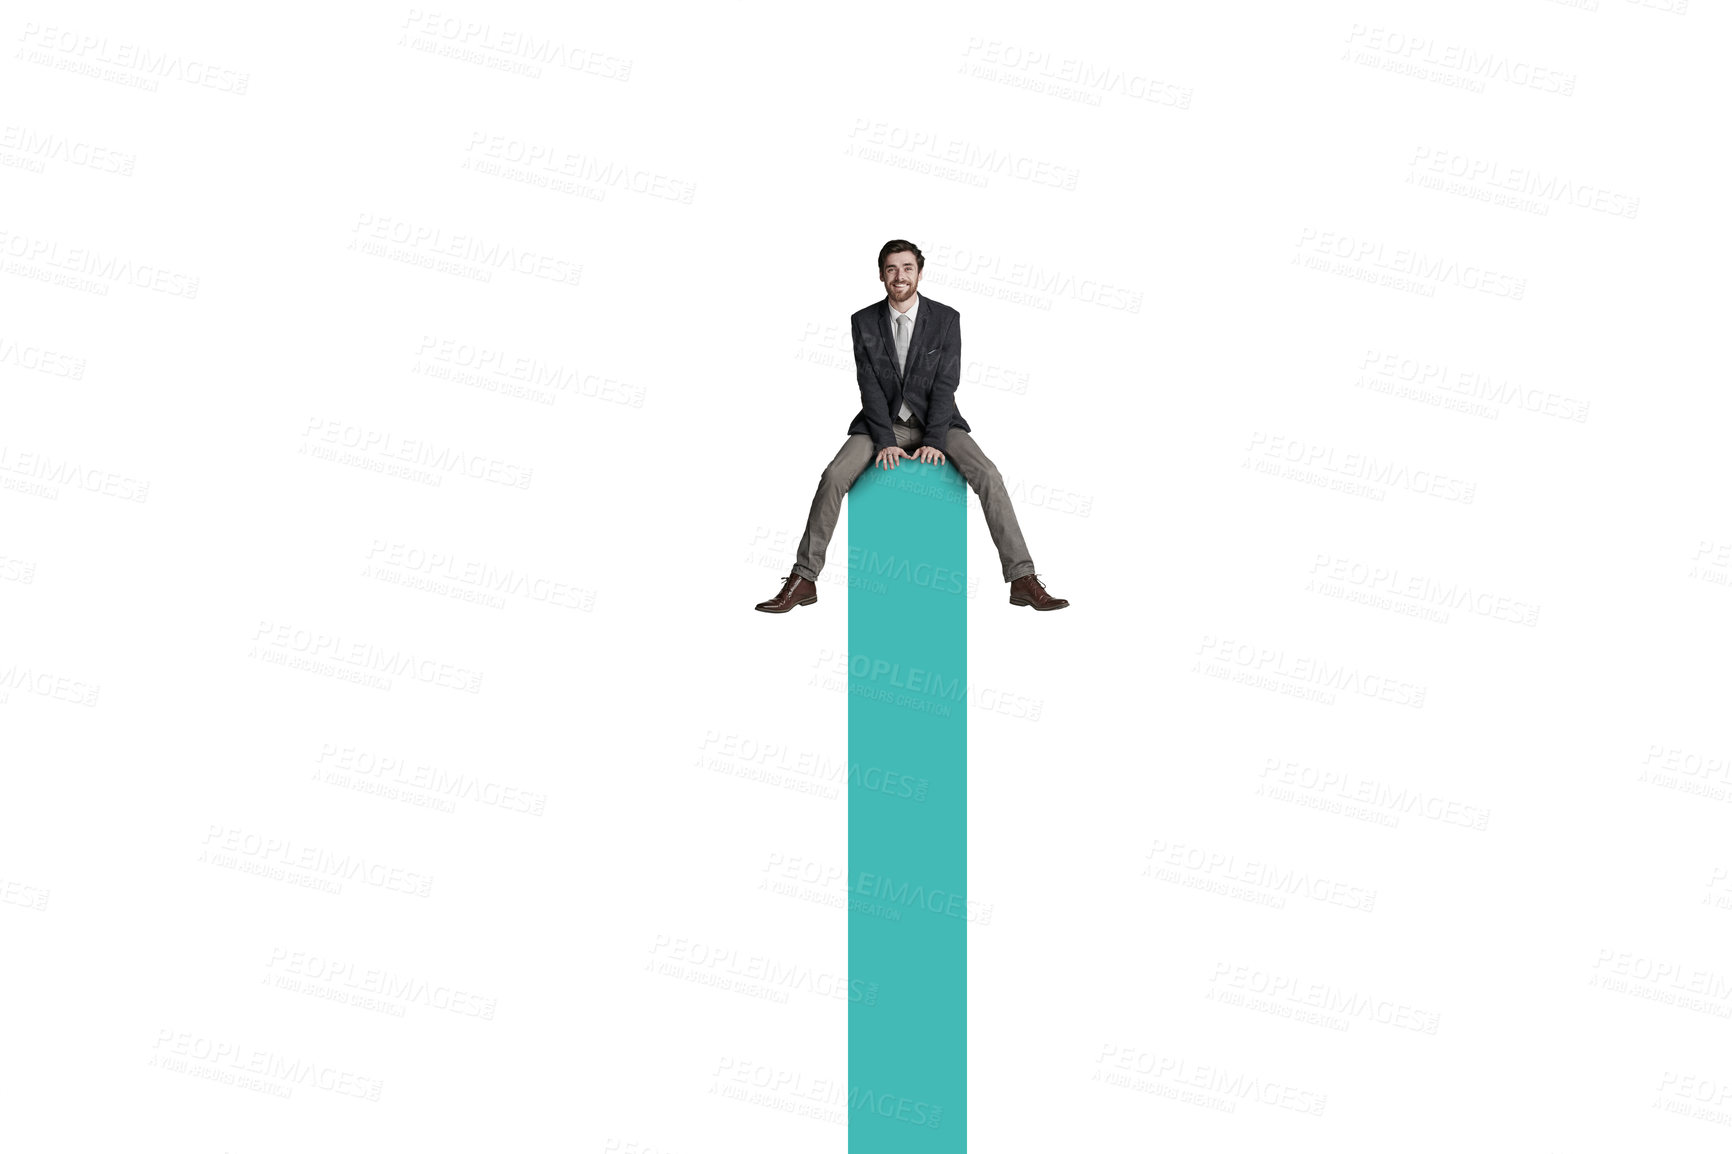 Buy stock photo Shot of a businessman sitting on top of a graph against a white background